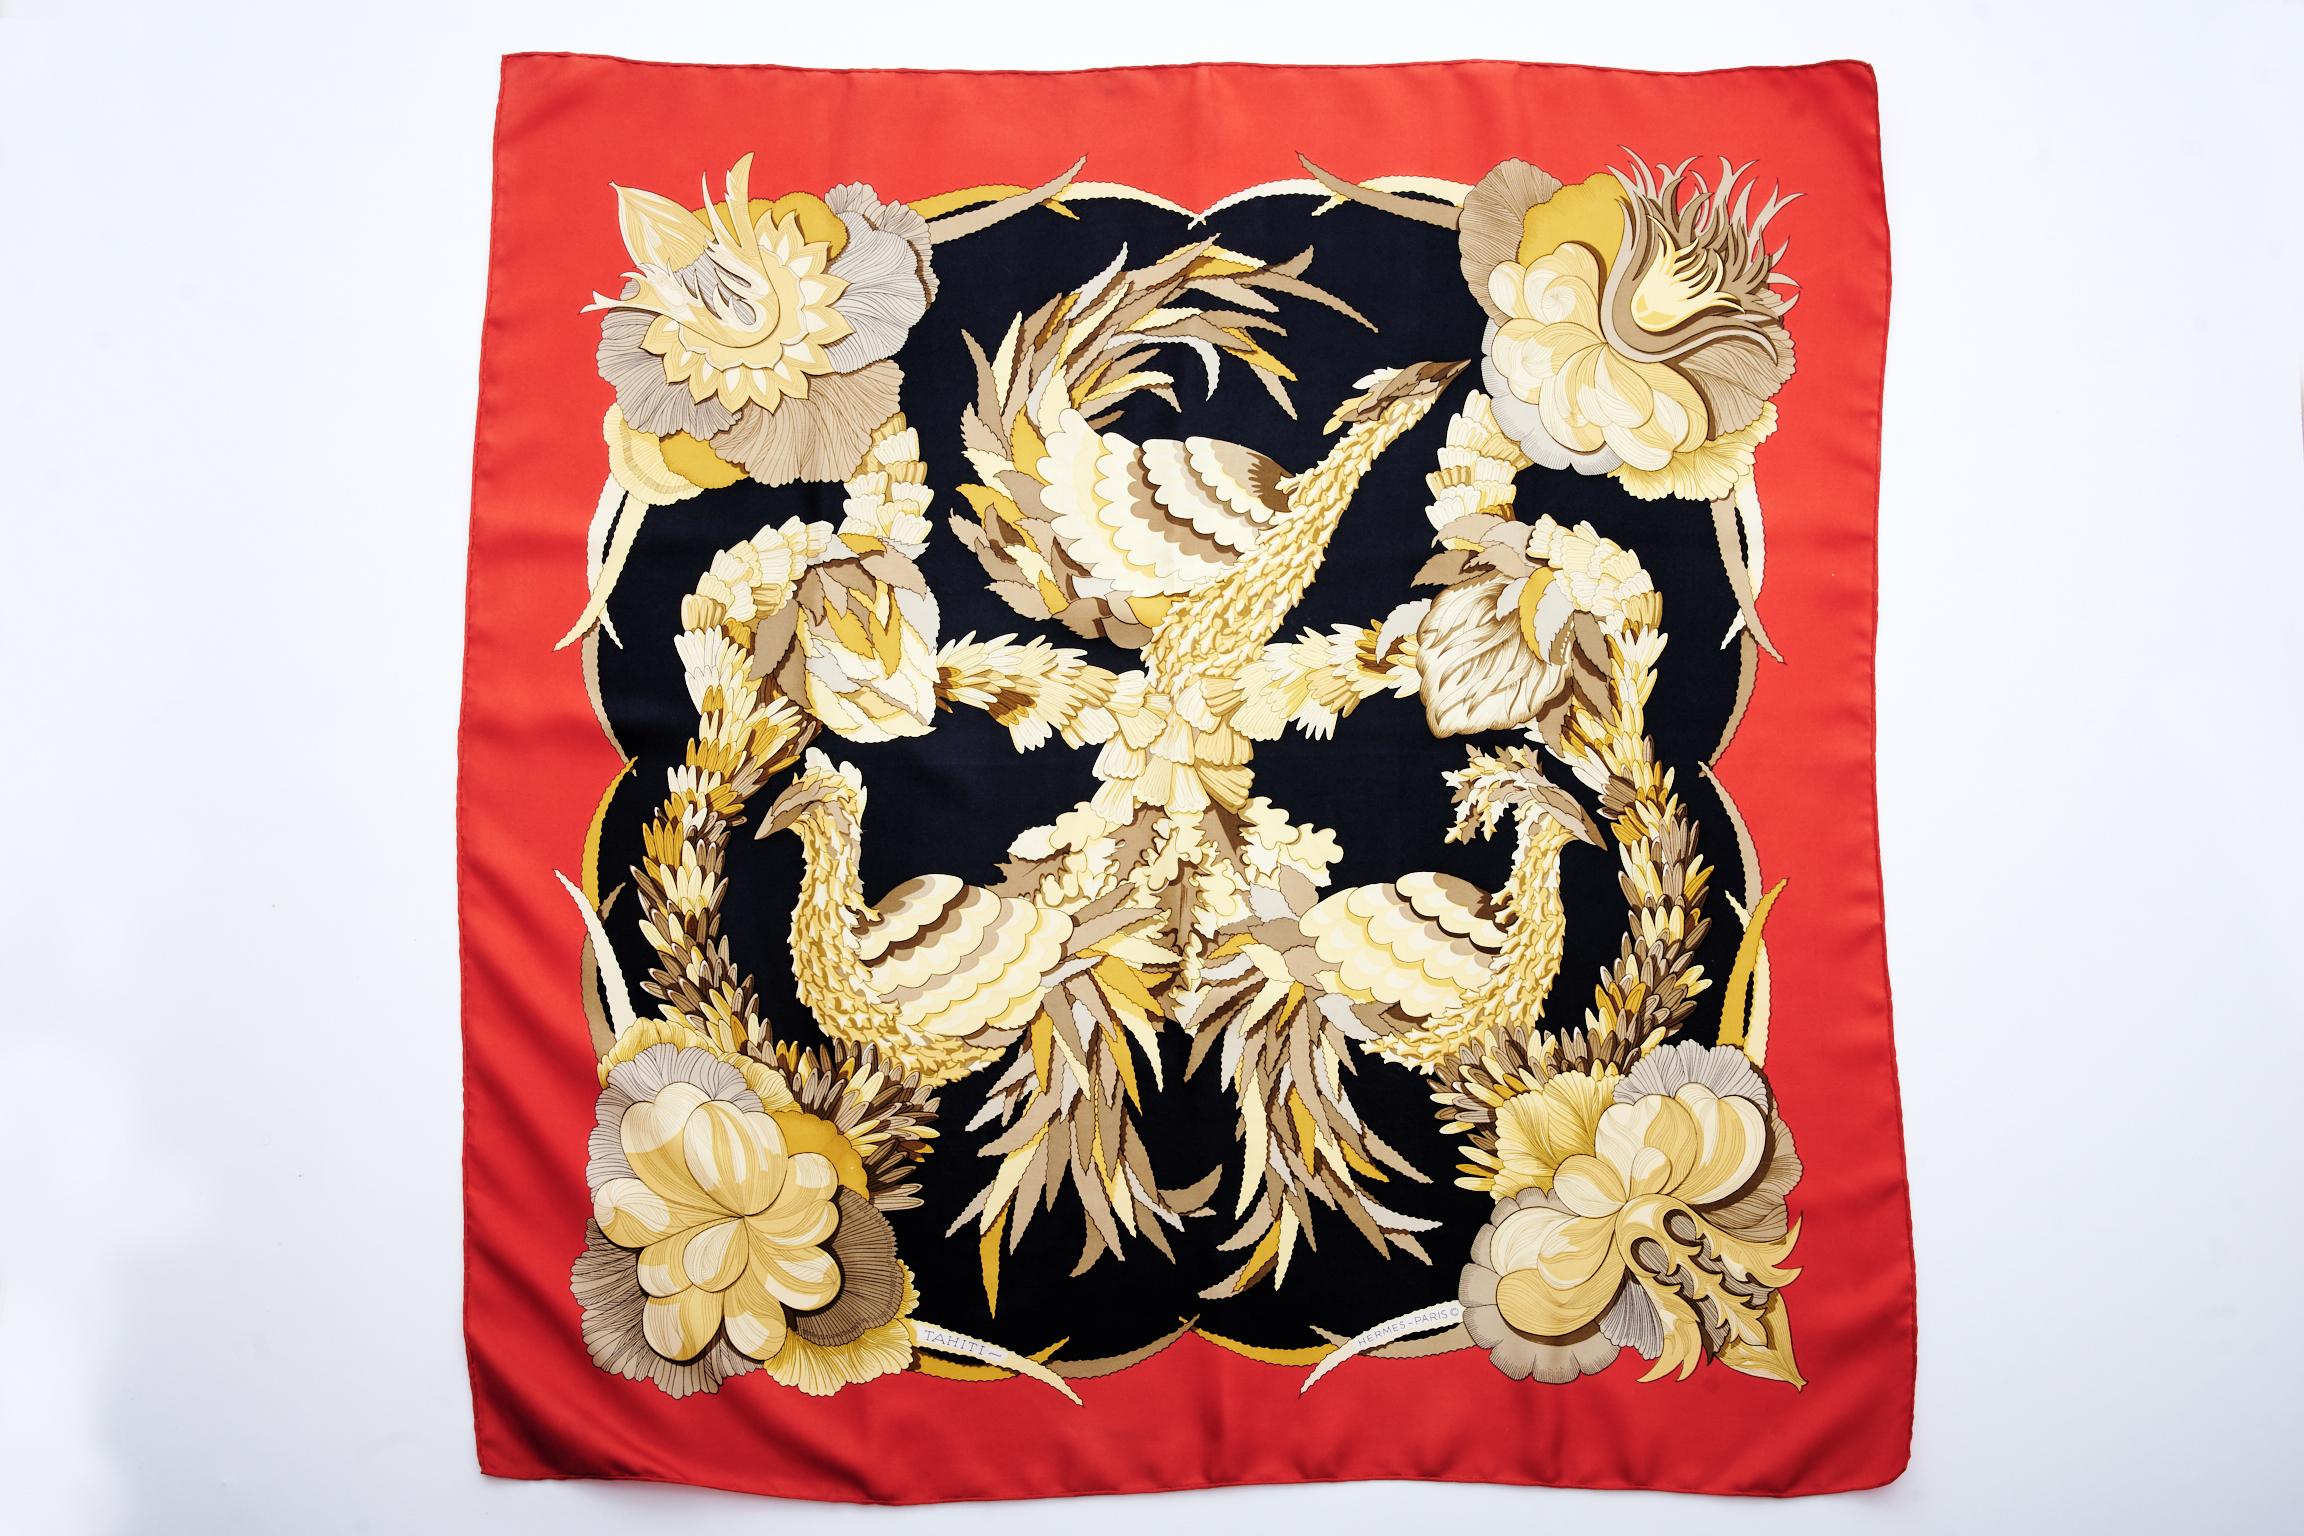 Designed by Caty Latham for Hermès in 1971, this rare and popular silk twill 